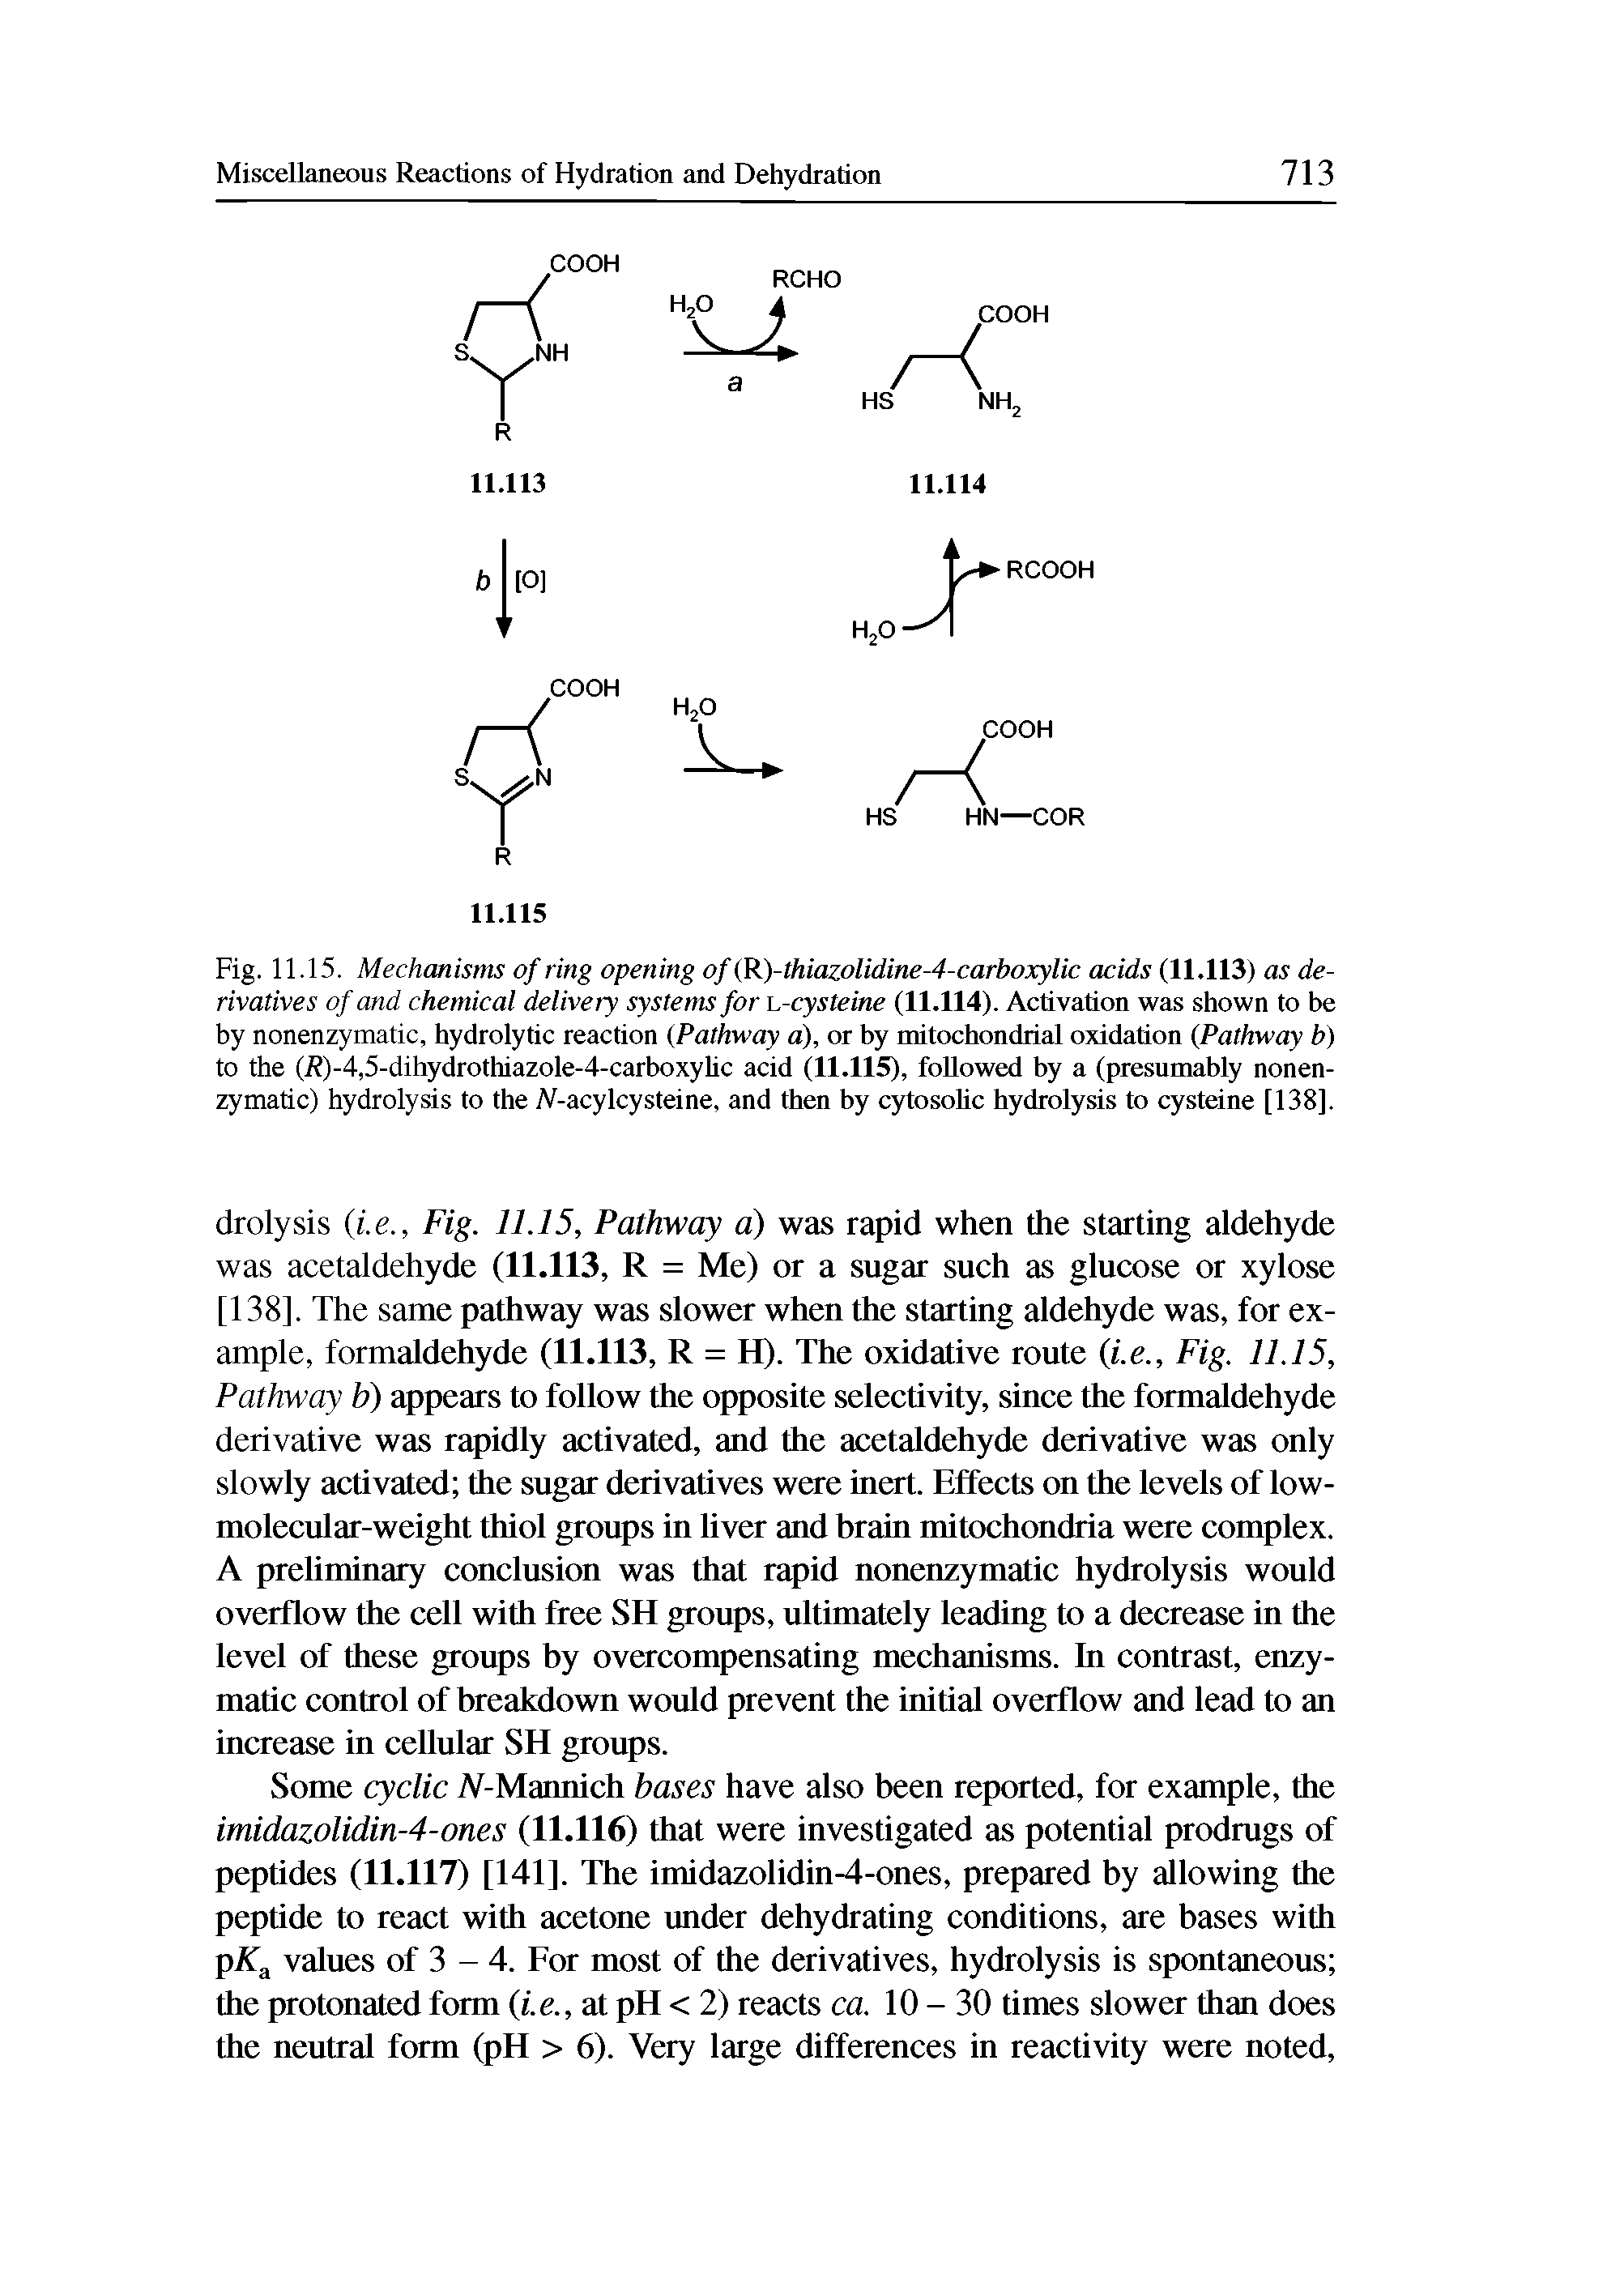 Fig. 11.15. Mechanisms of ring opening of (R)-thiazolidine-4-carboxylic acids (11.113) as derivatives of and chemical delivery systems for l-cysteine (11.114). Activation was shown to be by nonenzymatic, hydrolytic reaction (Pathway a), or by mitochondrial oxidation (Pathway b) to the (R)-4,5-dihydrothiazole-4-carboxylic acid (11.115), followed by a (presumably nonenzymatic) hydrolysis to the IV-acylcysteine, and then by cytosolic hydrolysis to cysteine [138].